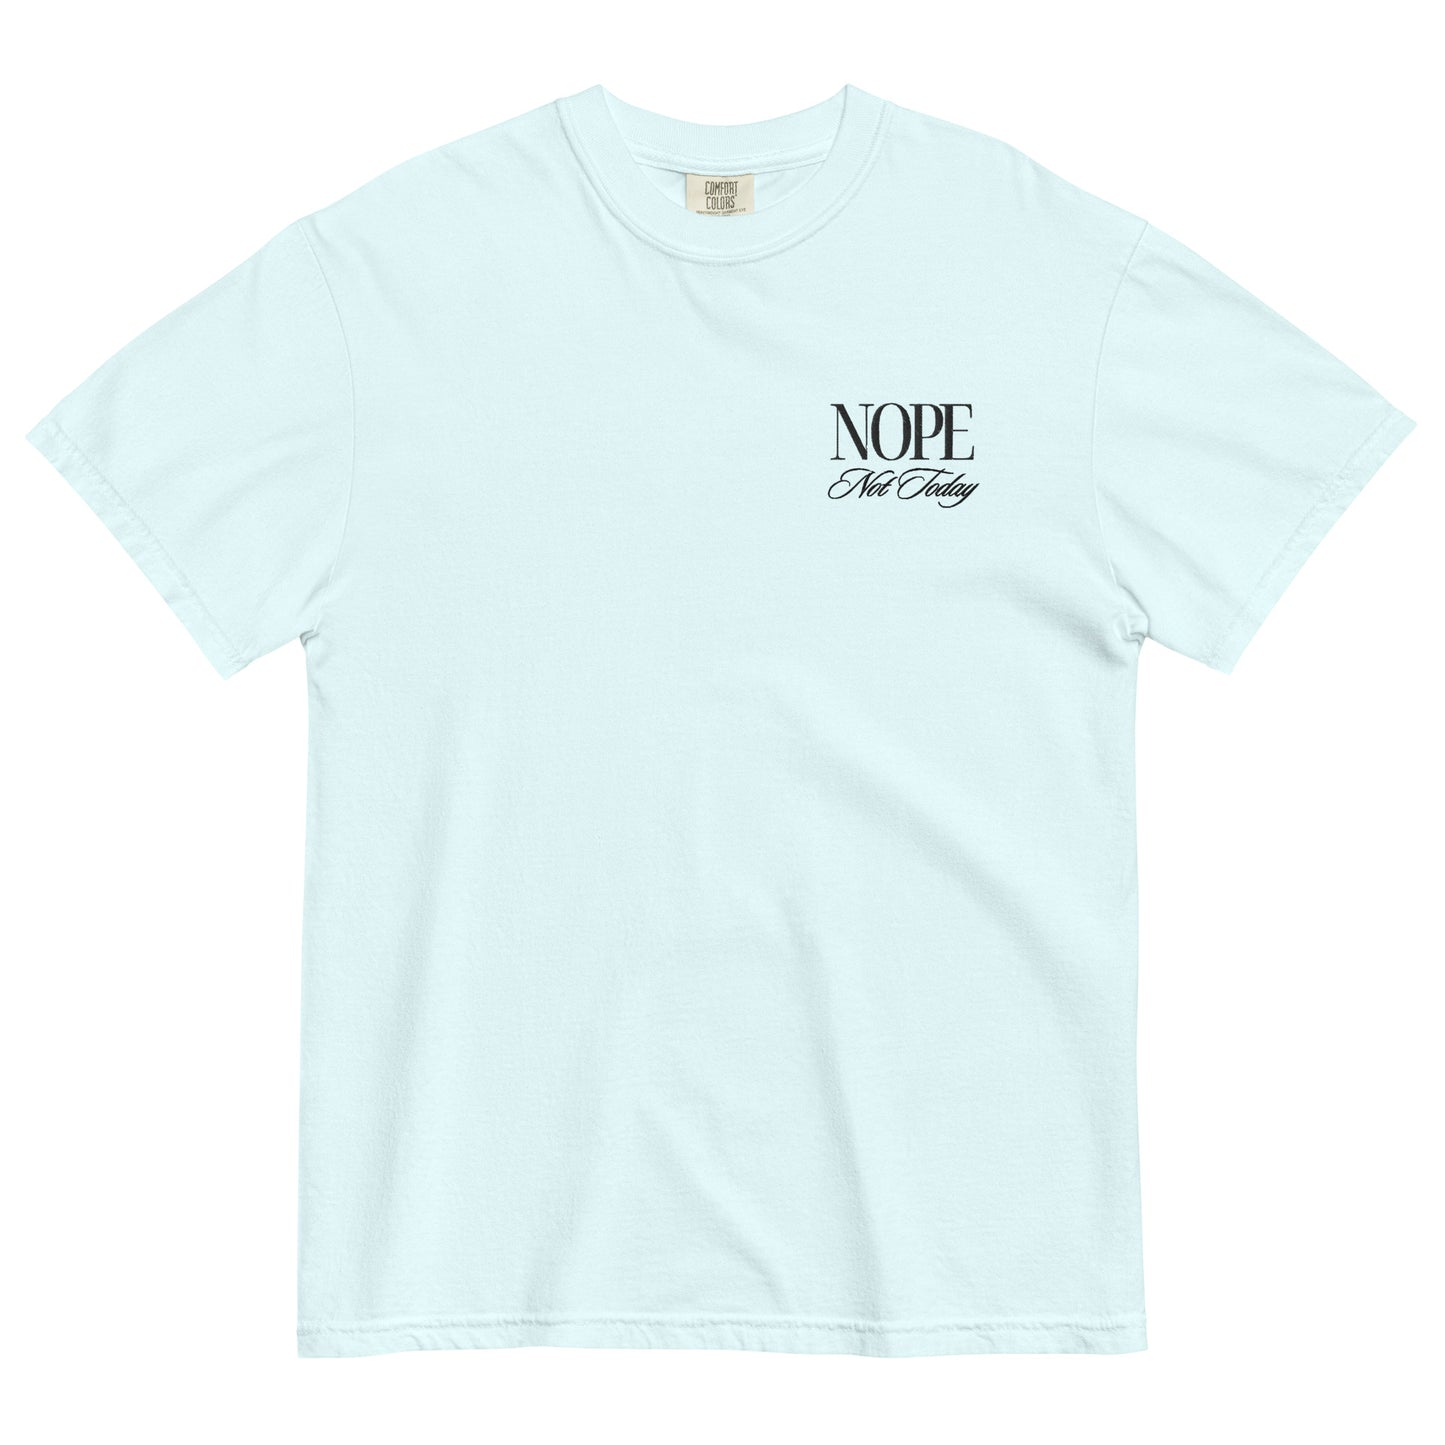 Women's Embroidered "Nope, Not Today" Summer Tee